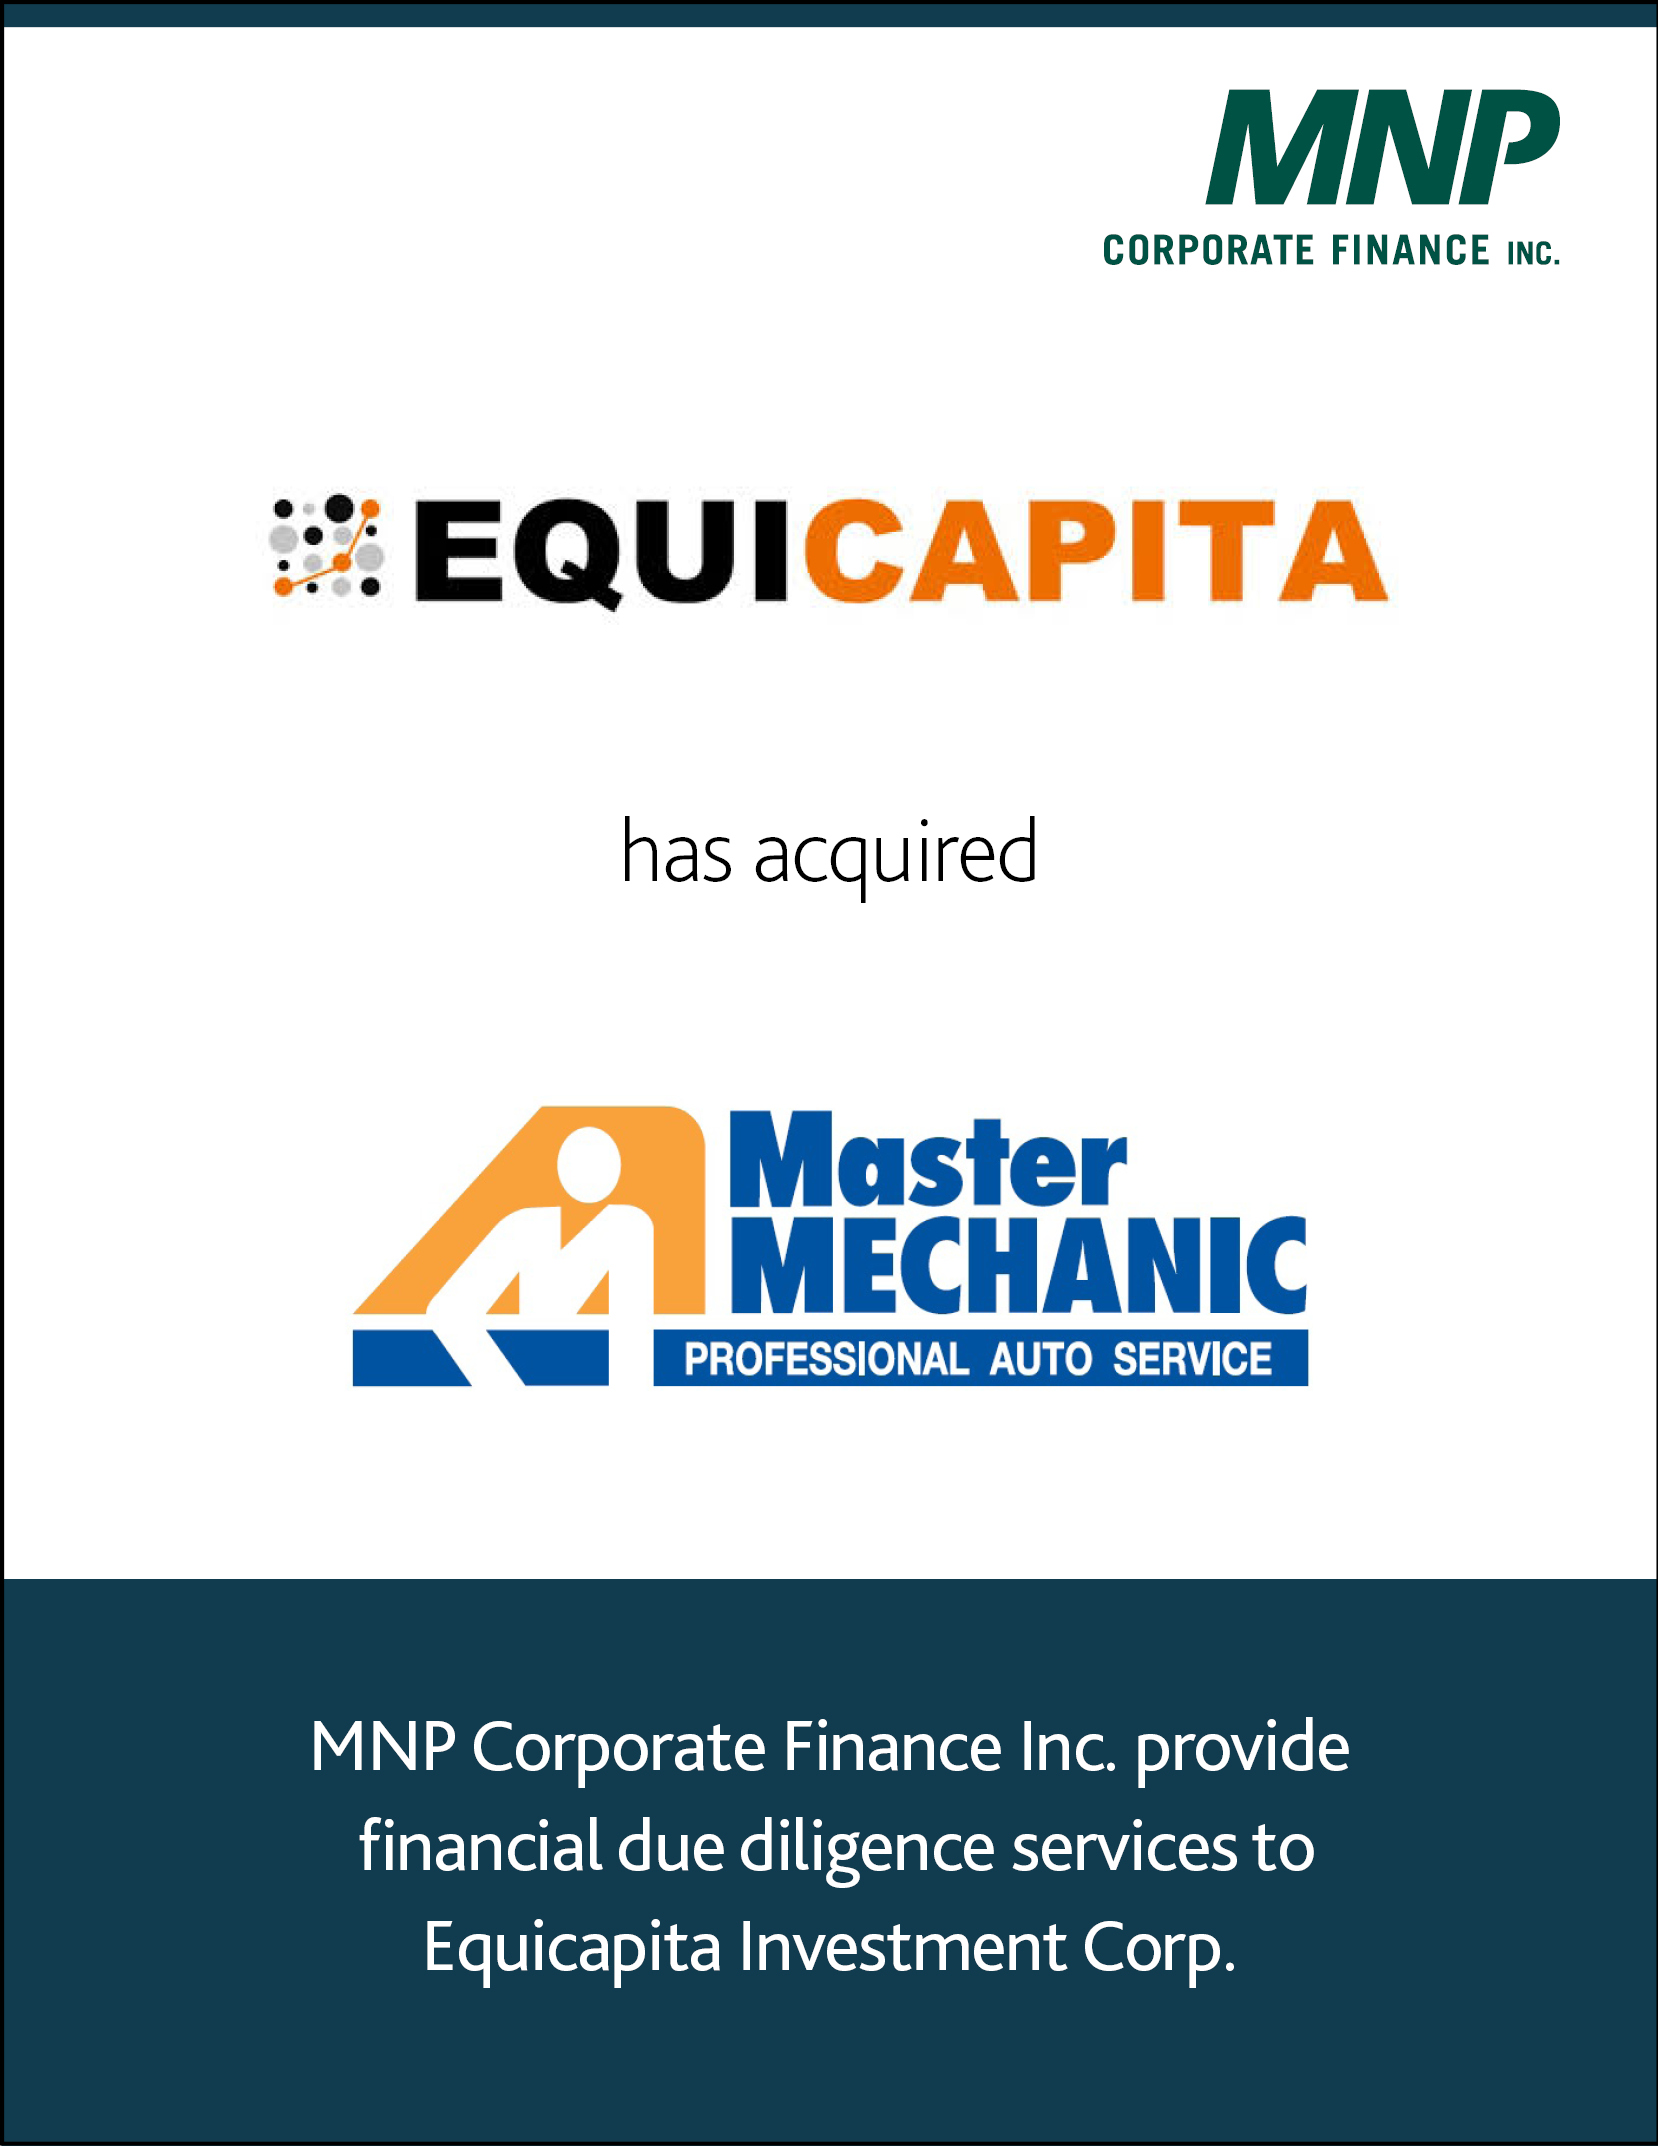 Equicapita Investment Corp. has acquired The Master Mechanic Inc.